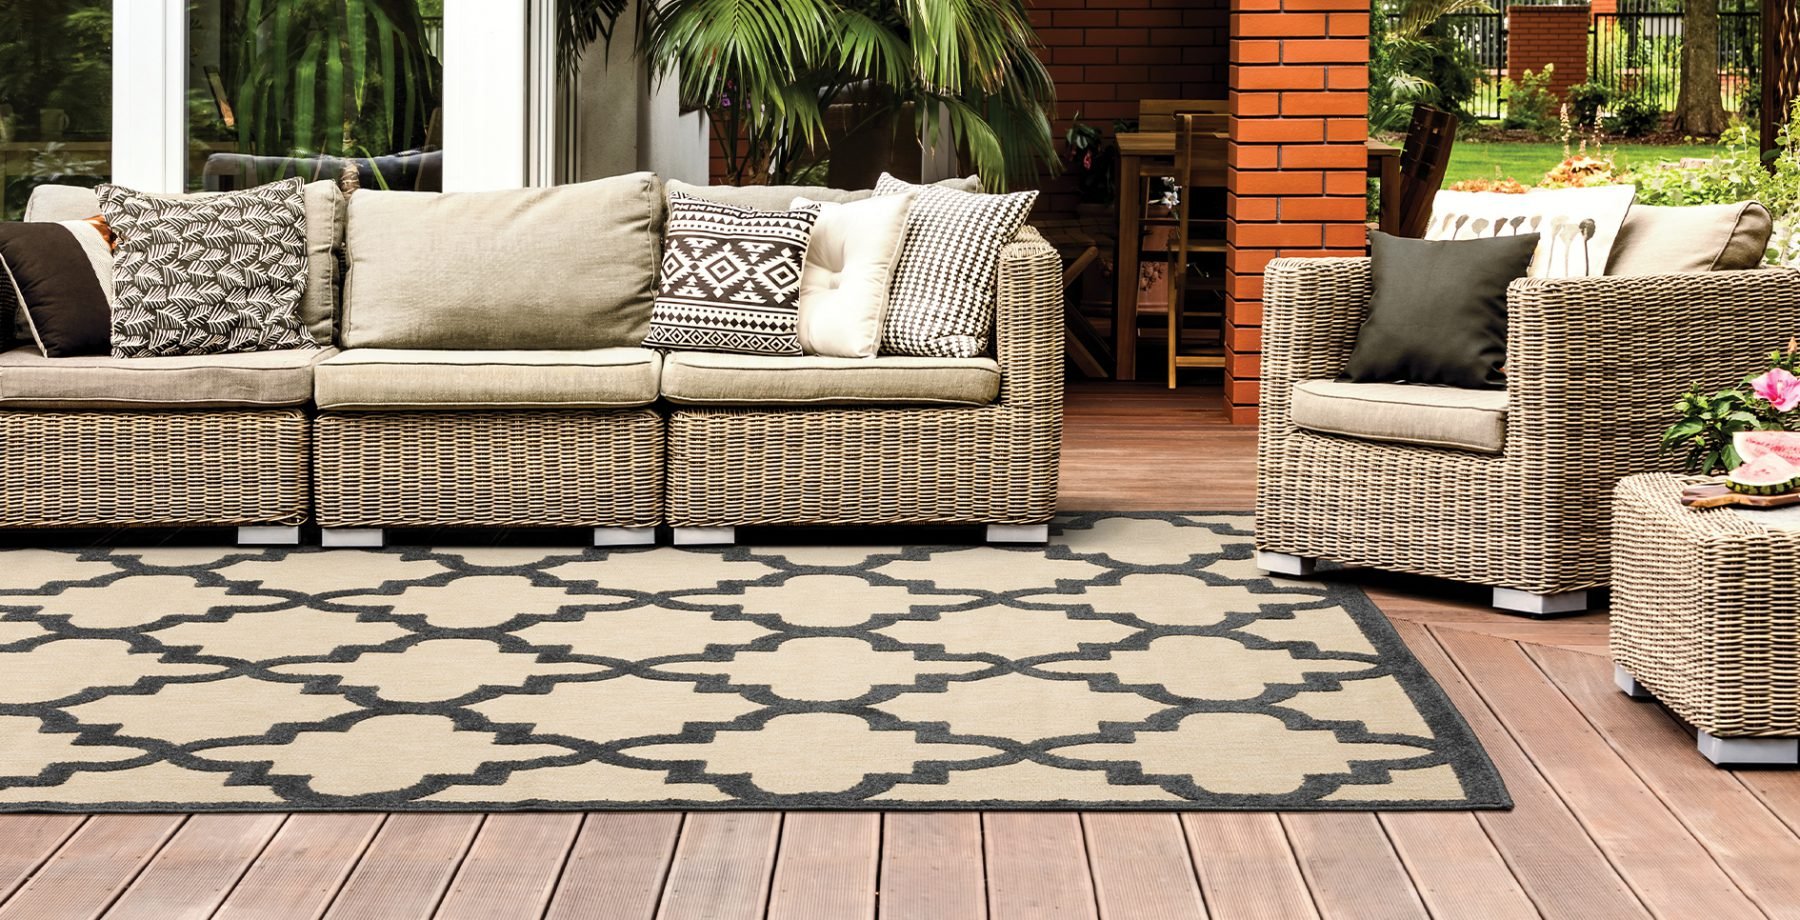 beige exterior couches on a terrace and area rug from Henson's Greater Tennessee Flooring in Knoxville TN